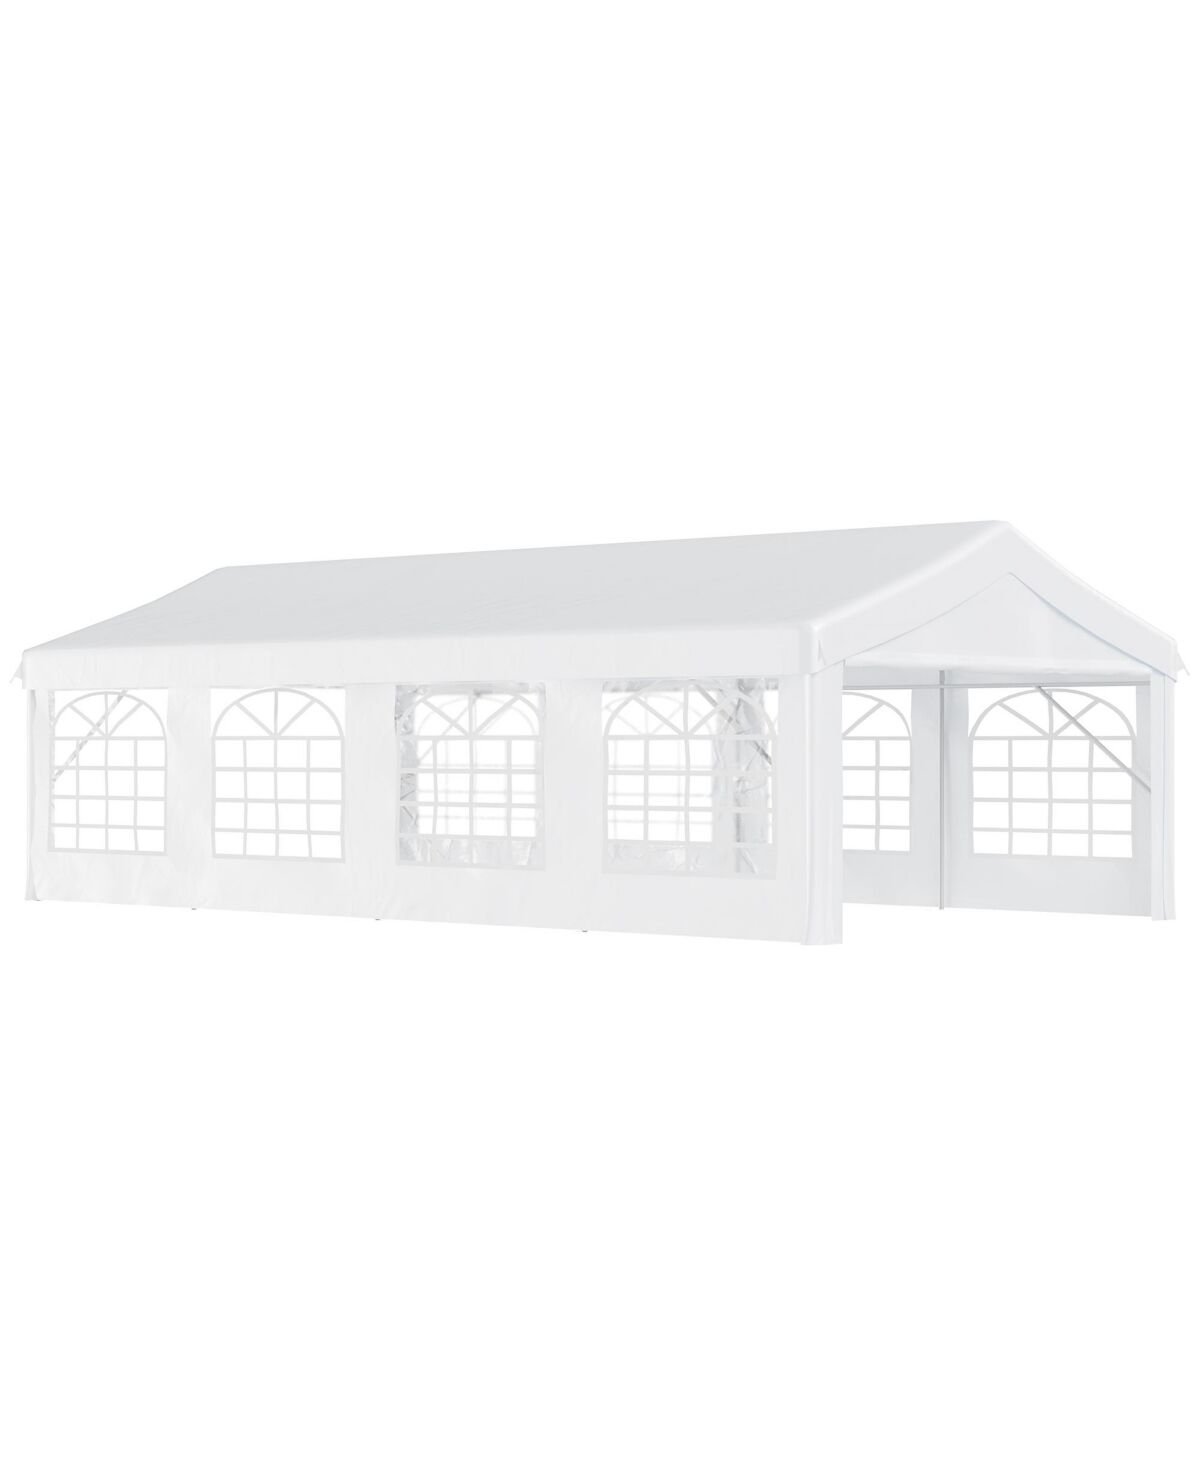 Outsunny 13' x 26' Party Tent & Carport with Removable Sidewalls and Zipper Doors, Heavy Duty Canopy Tent Sun Shade Shelter, for Parties, Wedding, Eve